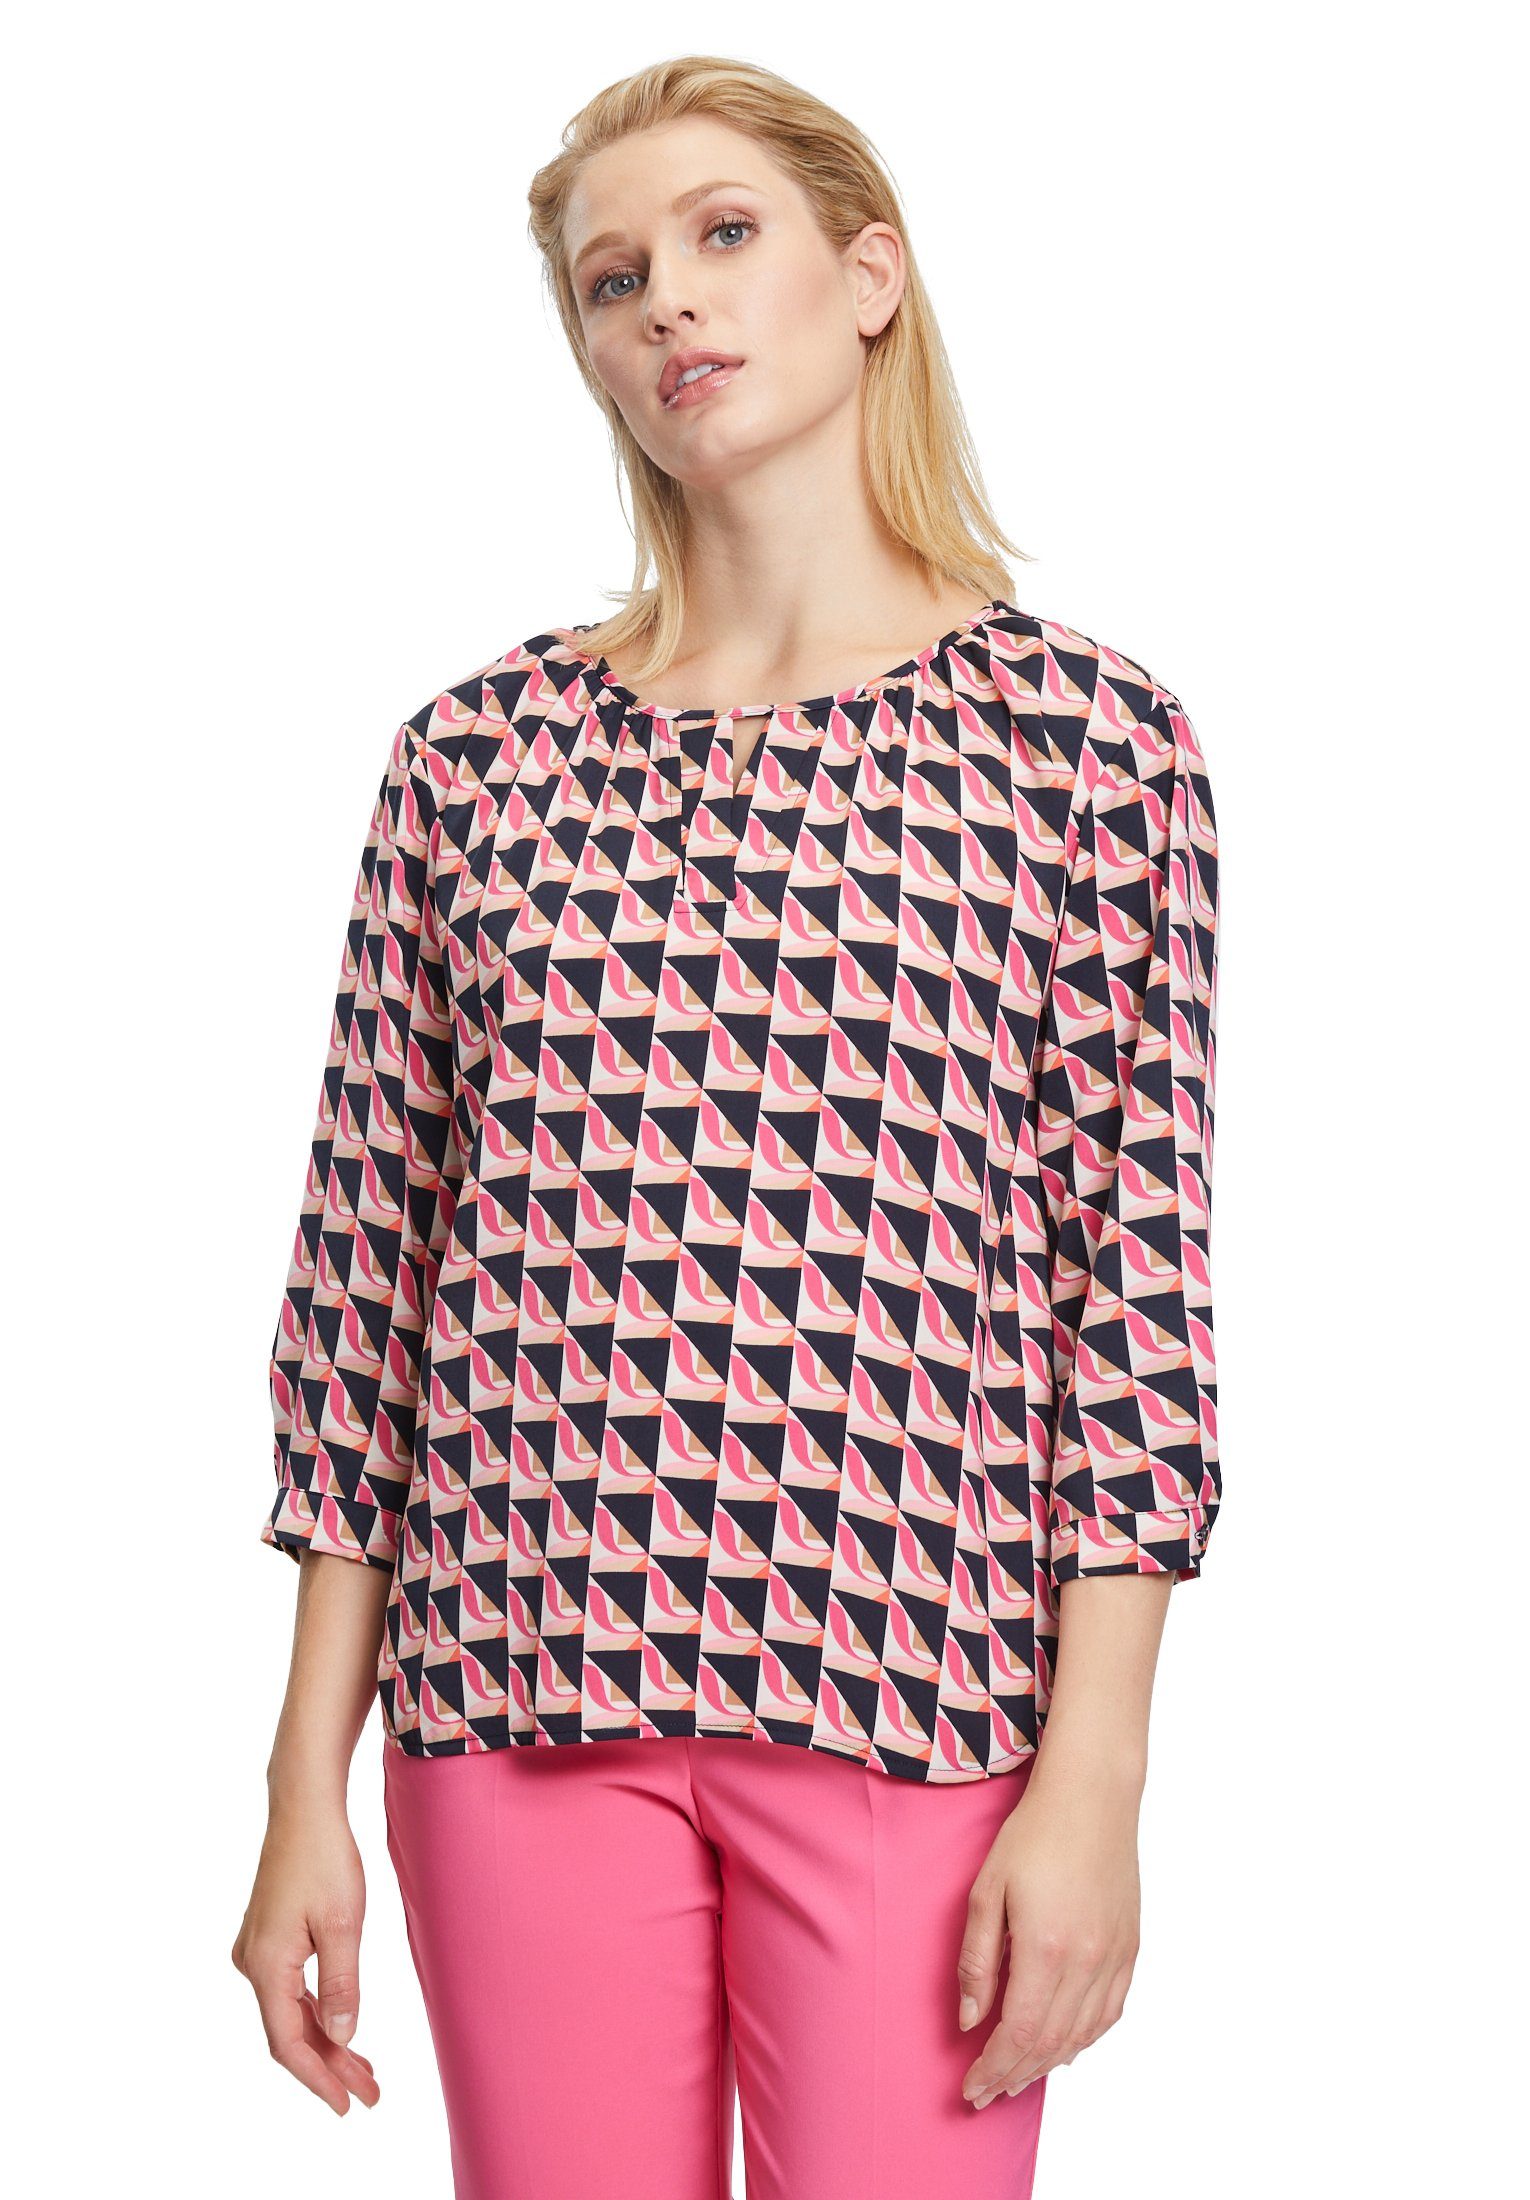 Betty Barclay Klassische Bluse mit Muster Muster Rosa